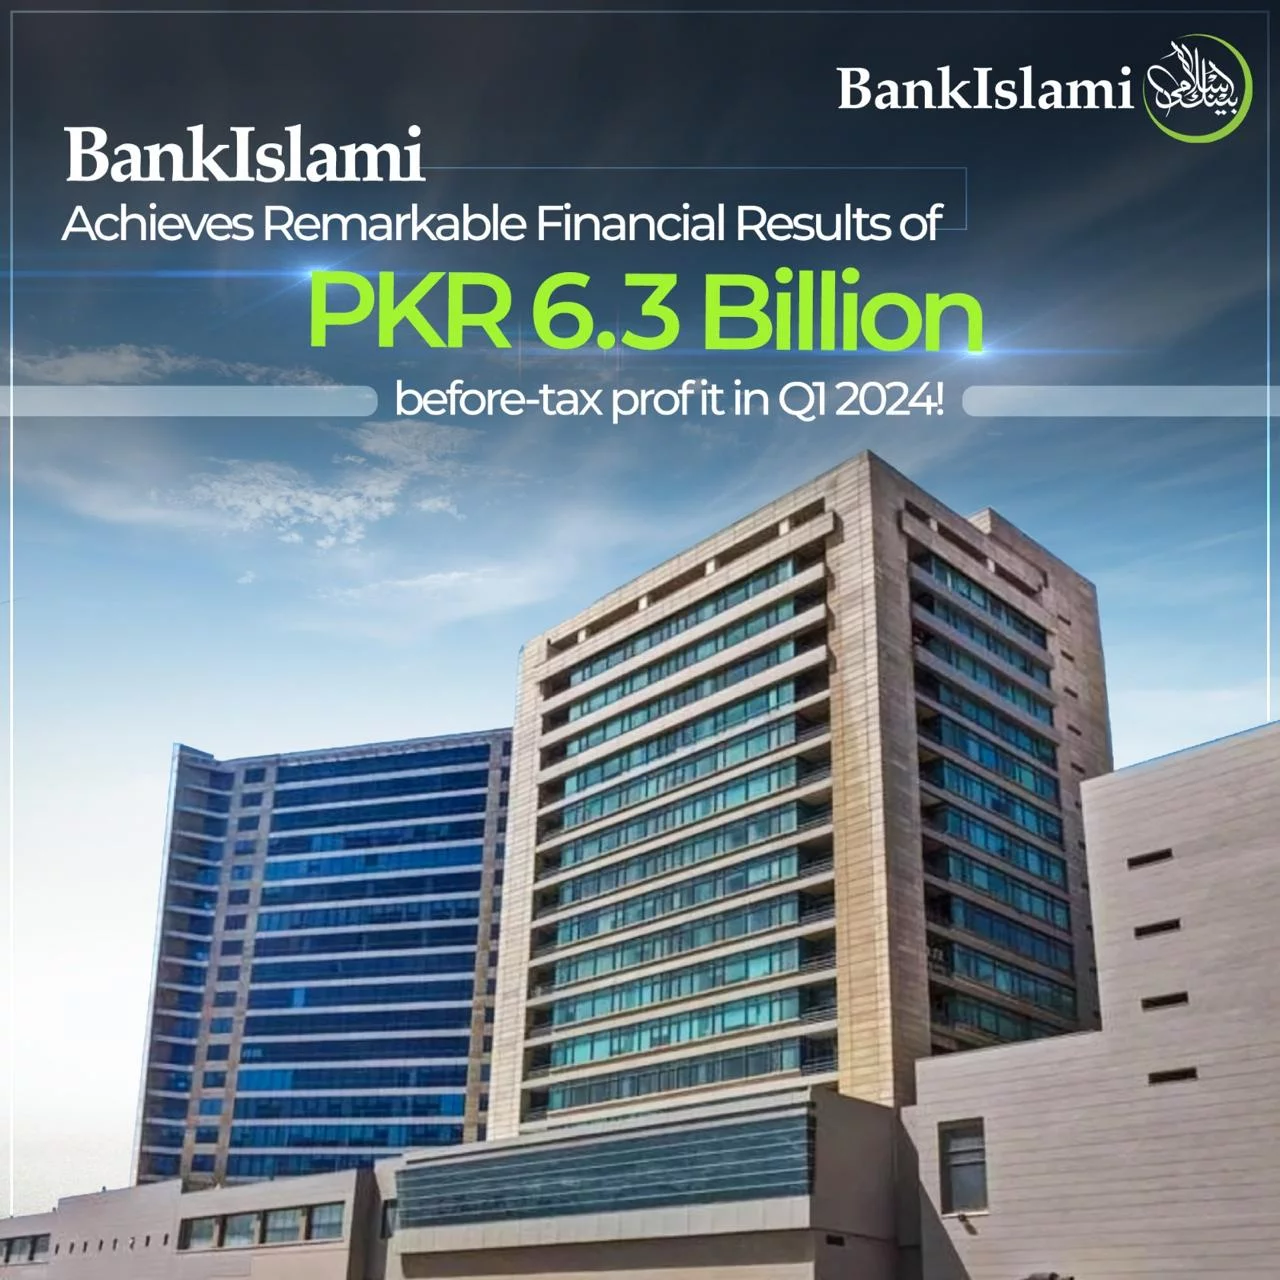 BankIslami Achieves Remarkable Financial Results of PKR 6.3 Billion Before Tax Profit in Q1 2024